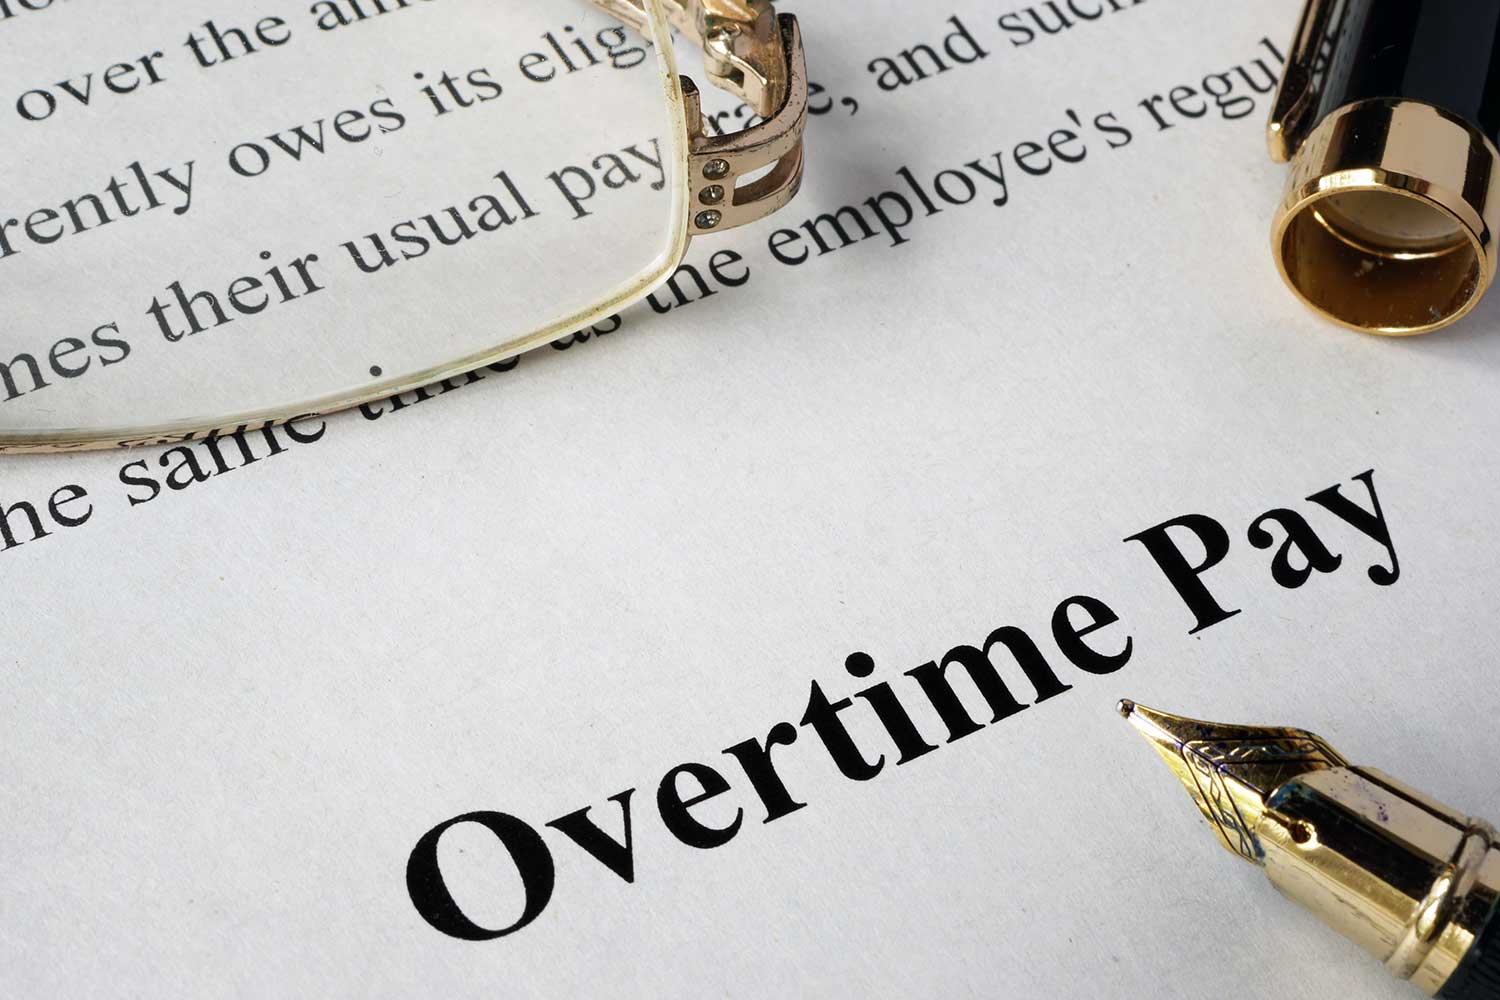 Overtime pay concept written on a paper.